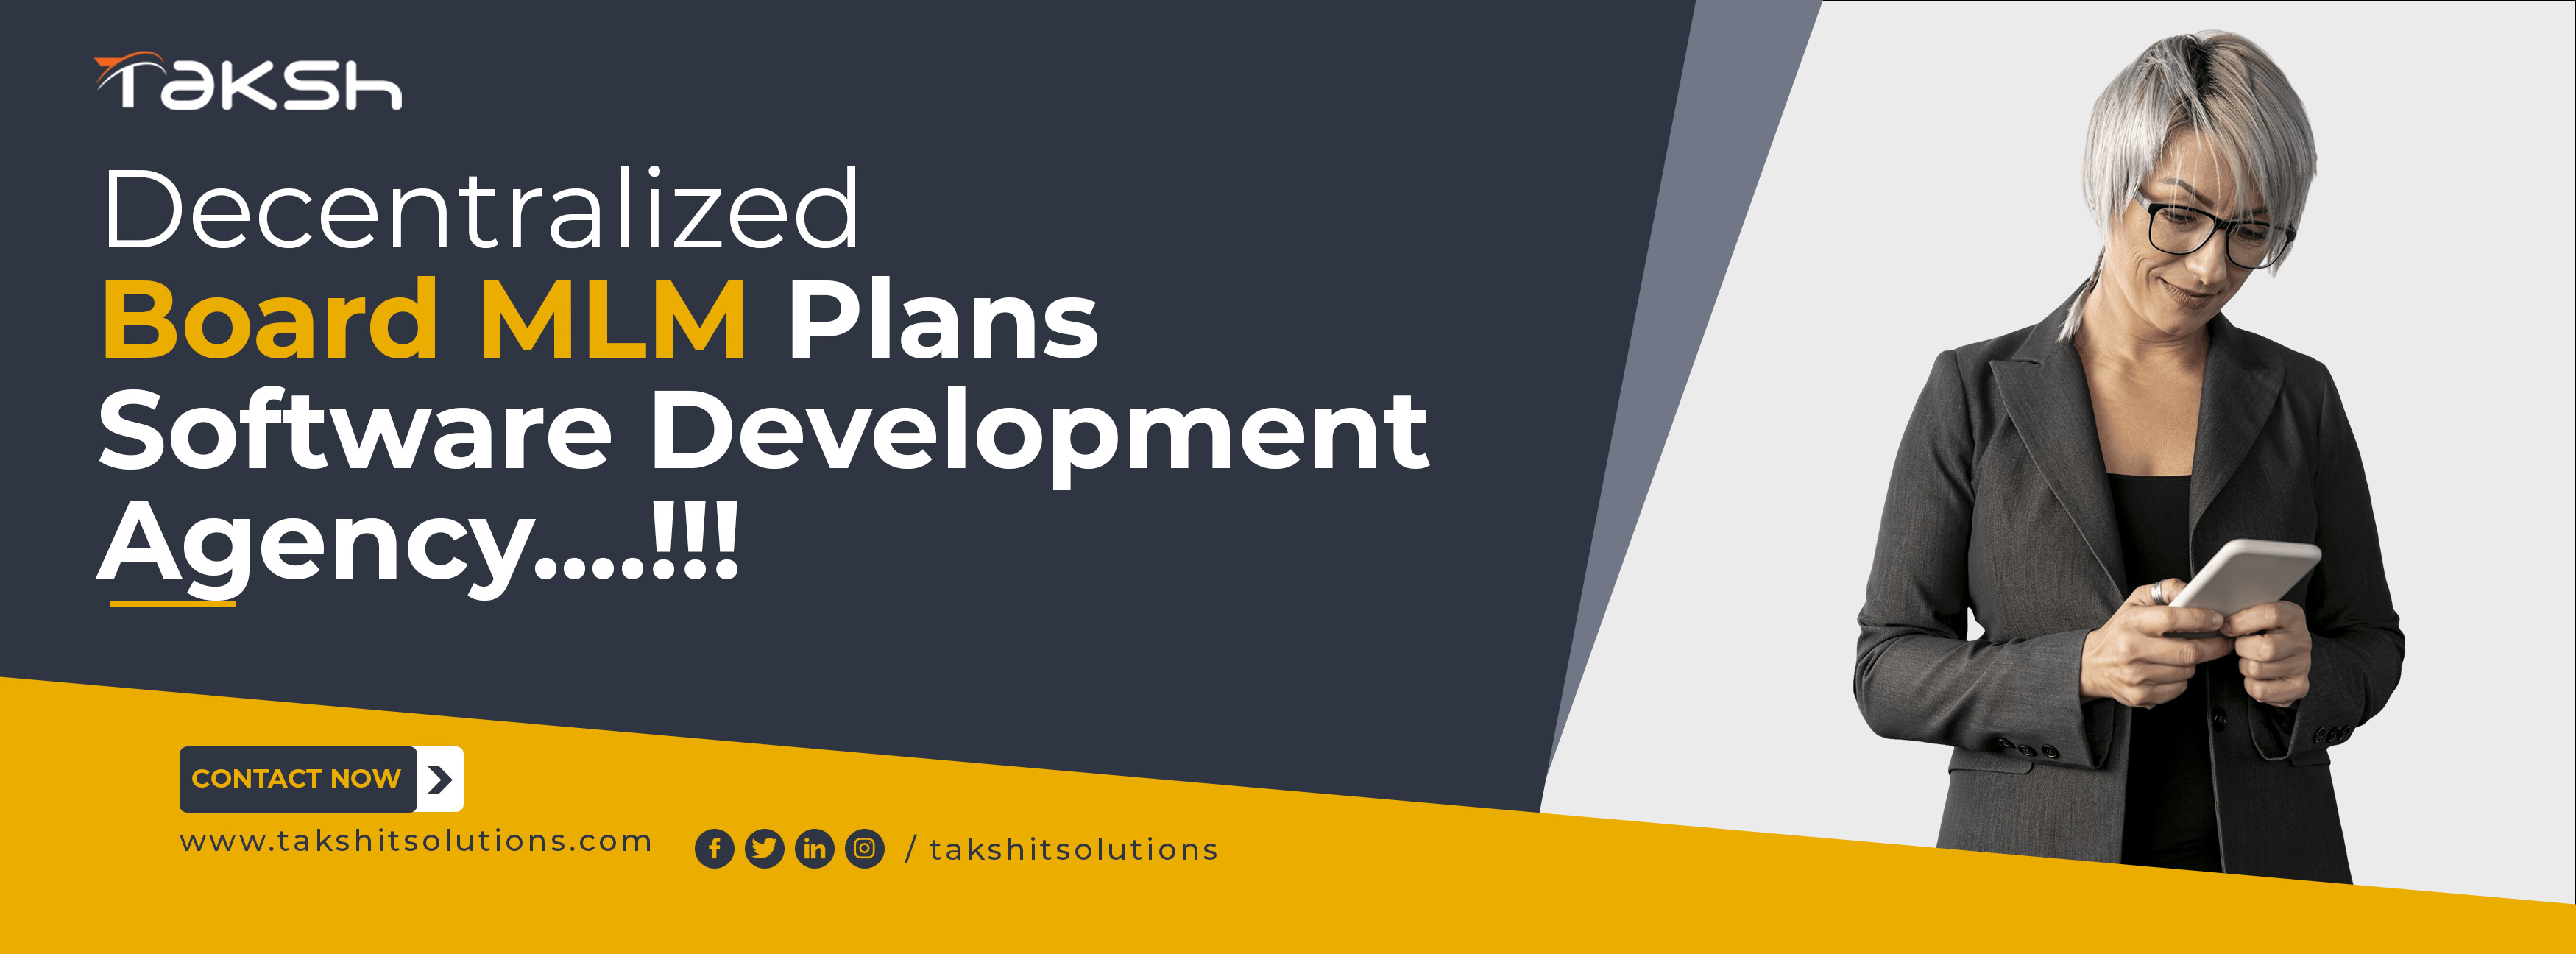  Decentralized Board MLM Plans Software Development Company - Taksh IT Solutions Private Limited